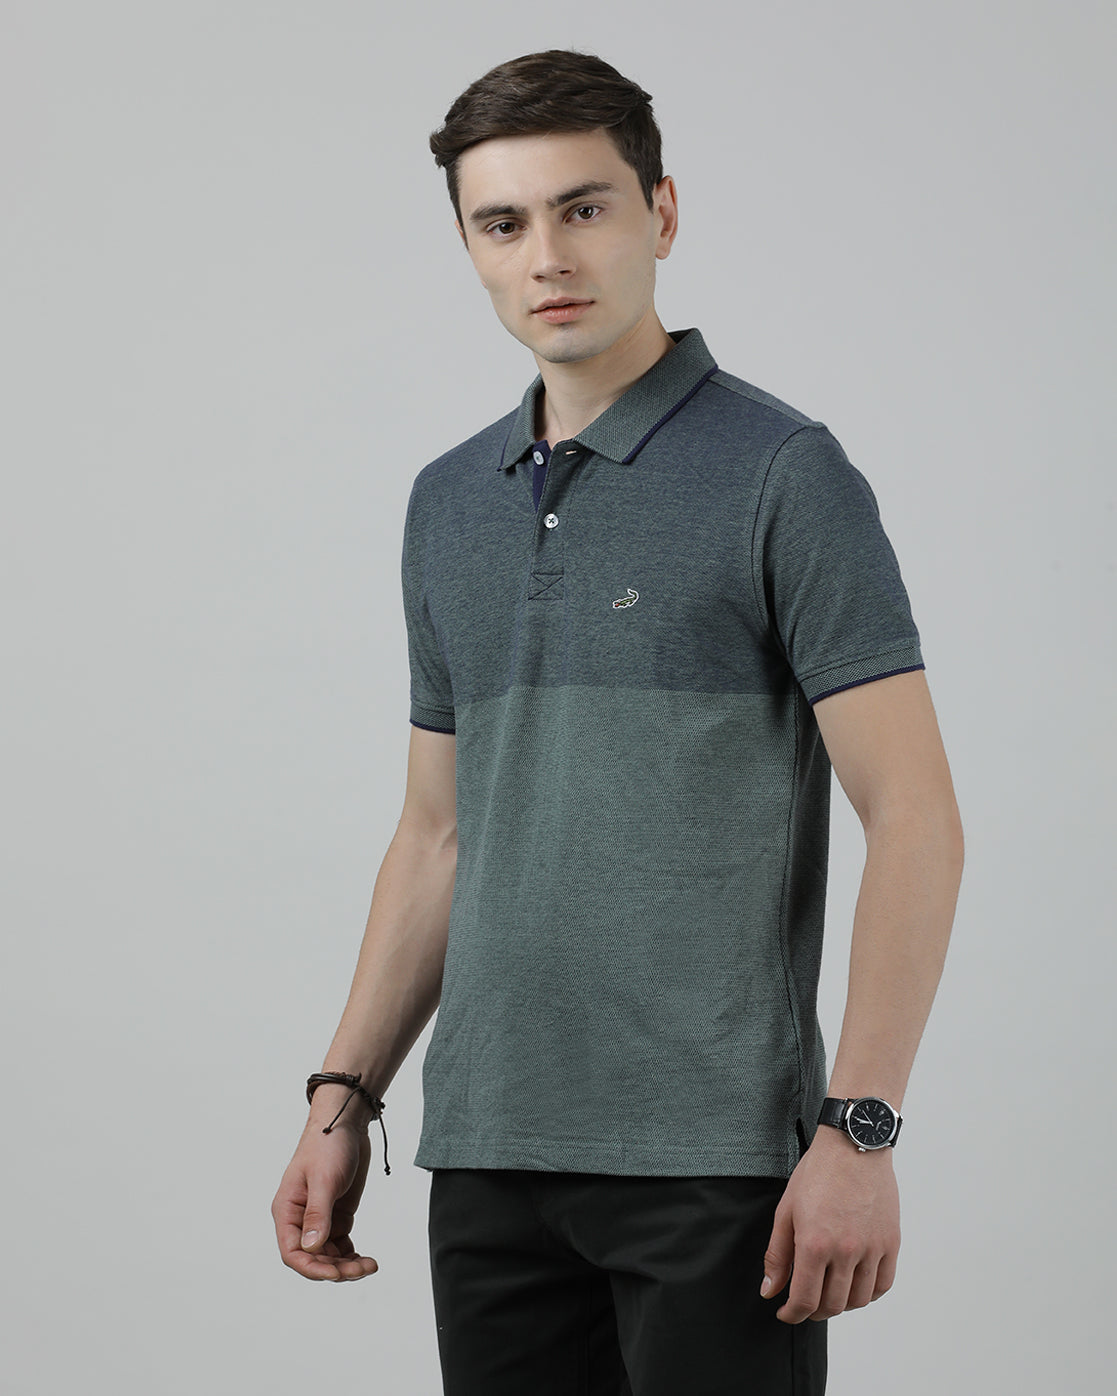 Casual Green T-Shirt Engineering Stripes Jacquard Half Sleeve Slim Fit with Collar for Men